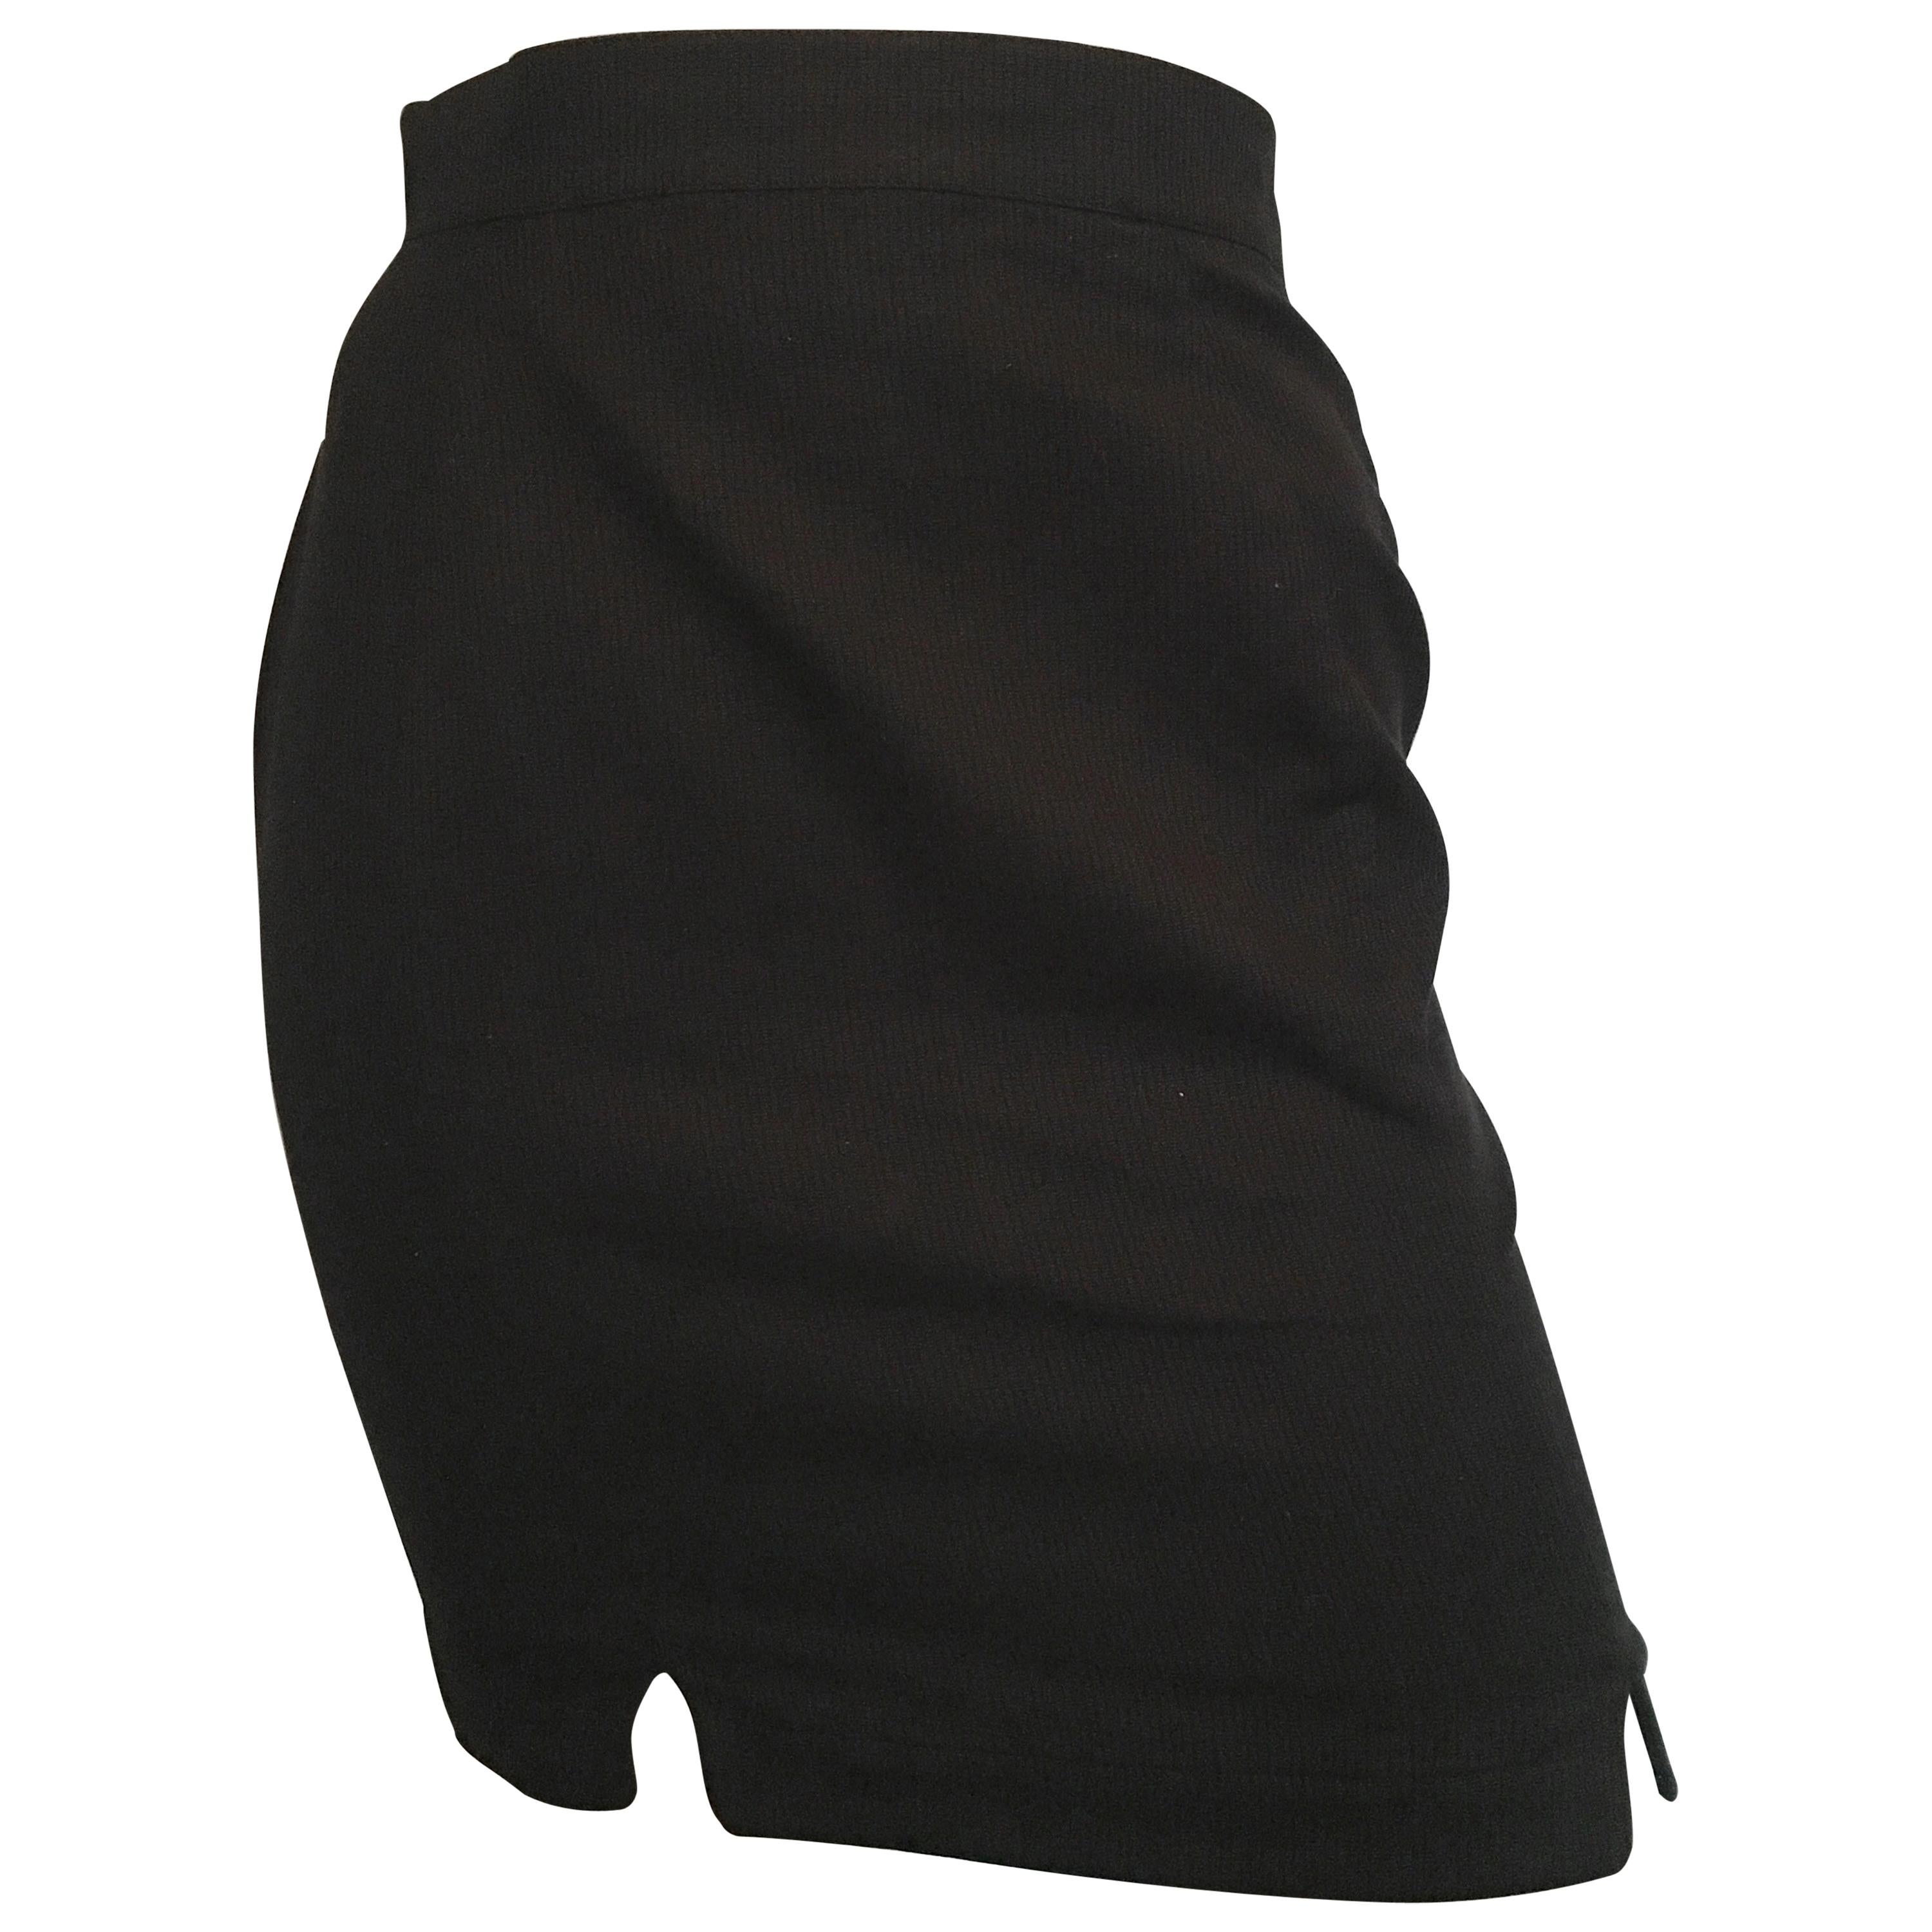 Thierry Mugler 1990s Black Cotton Short Skirt Size 2. For Sale